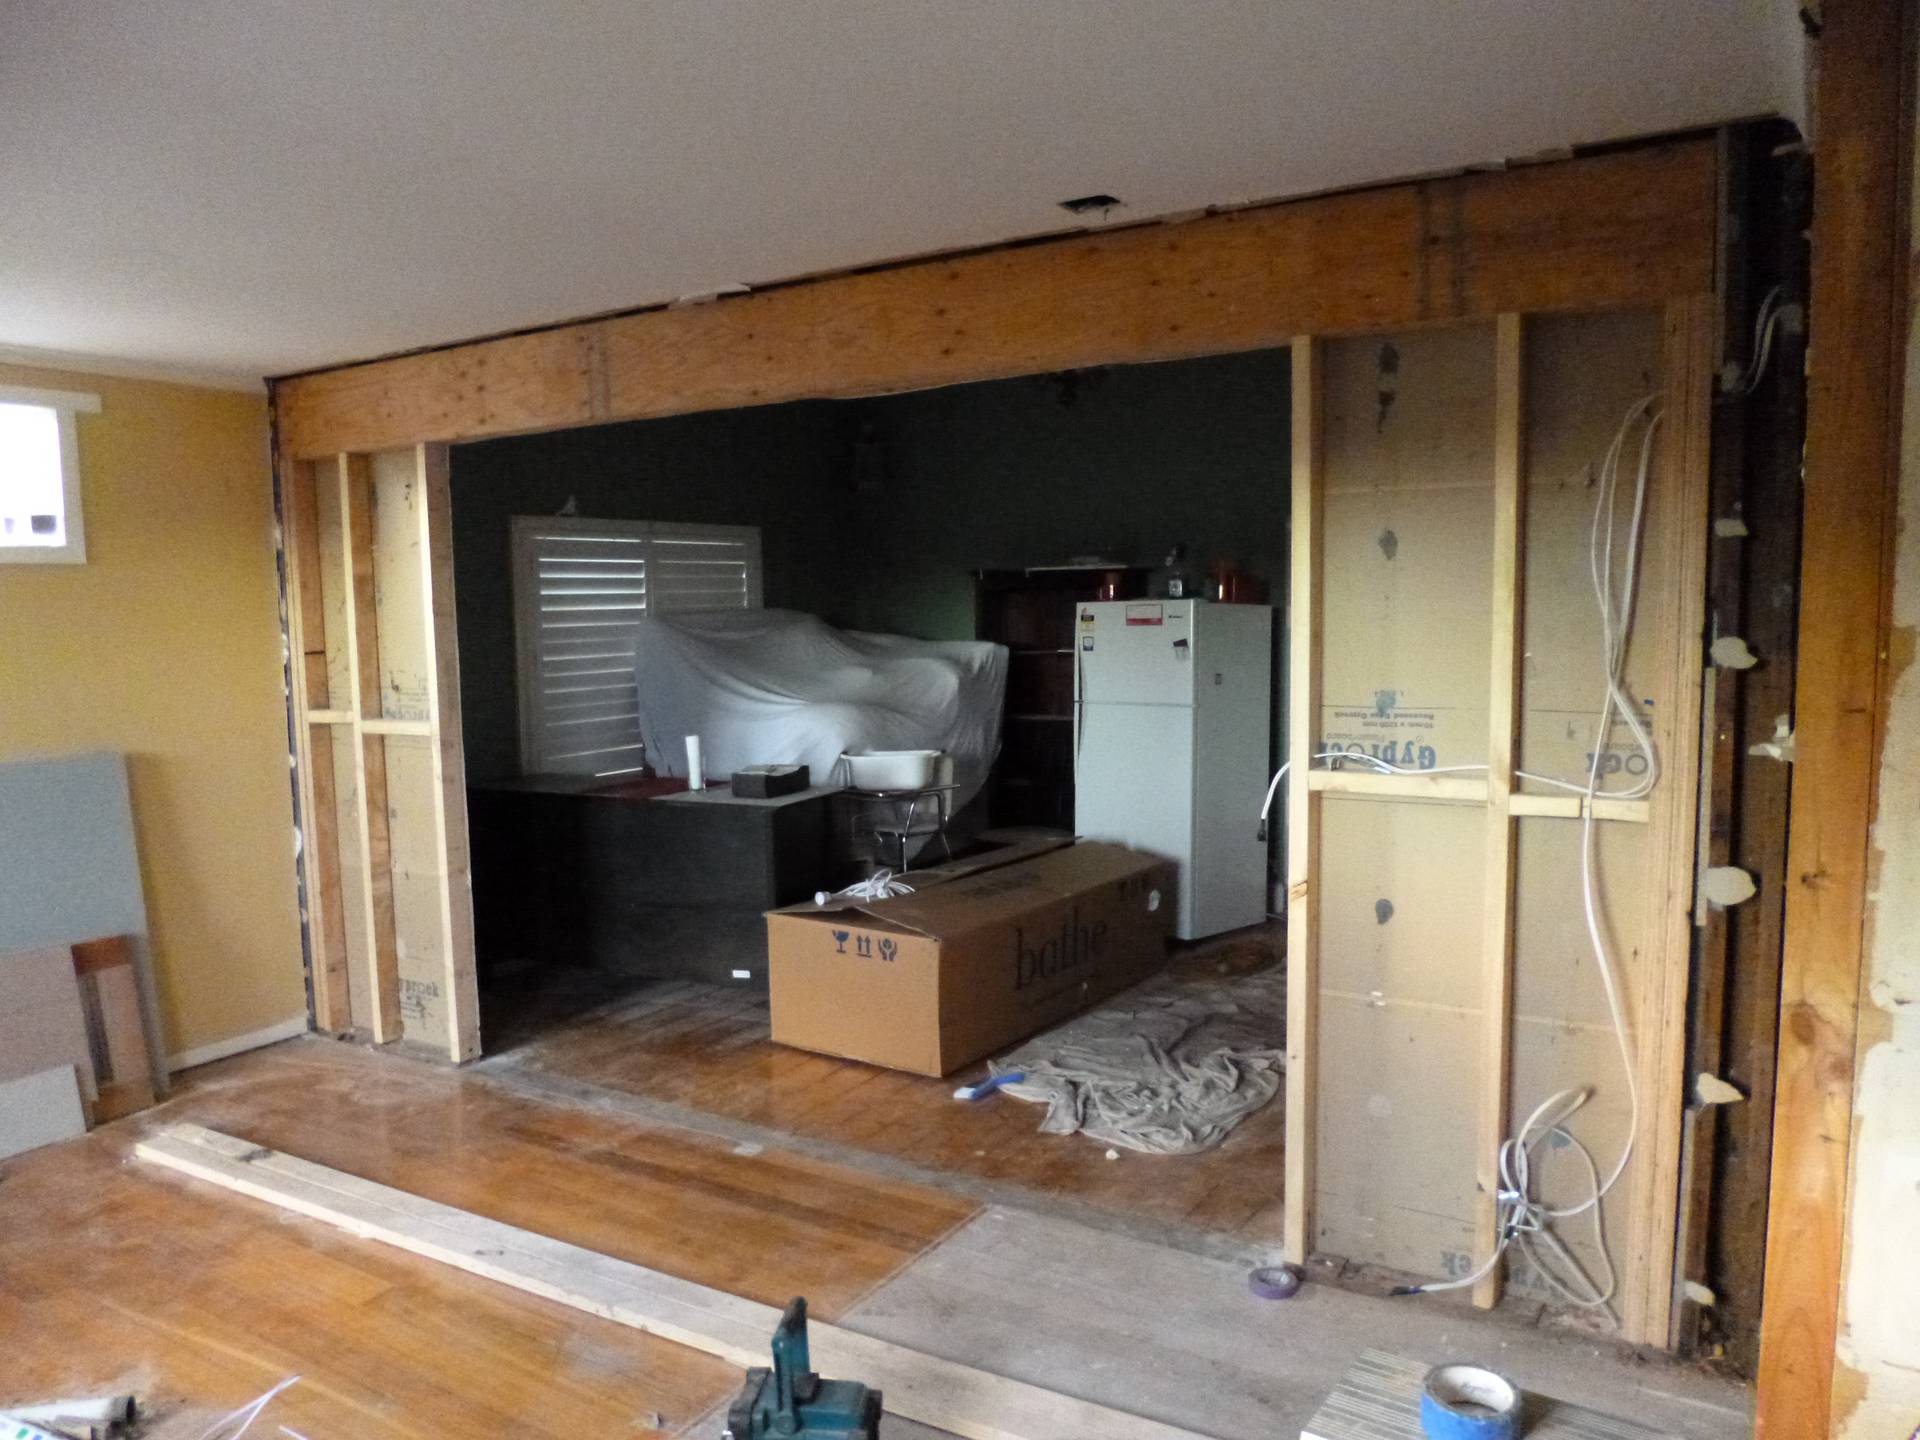 Installation of timber lintel for a larger opening between the lounge and kitchen areas.